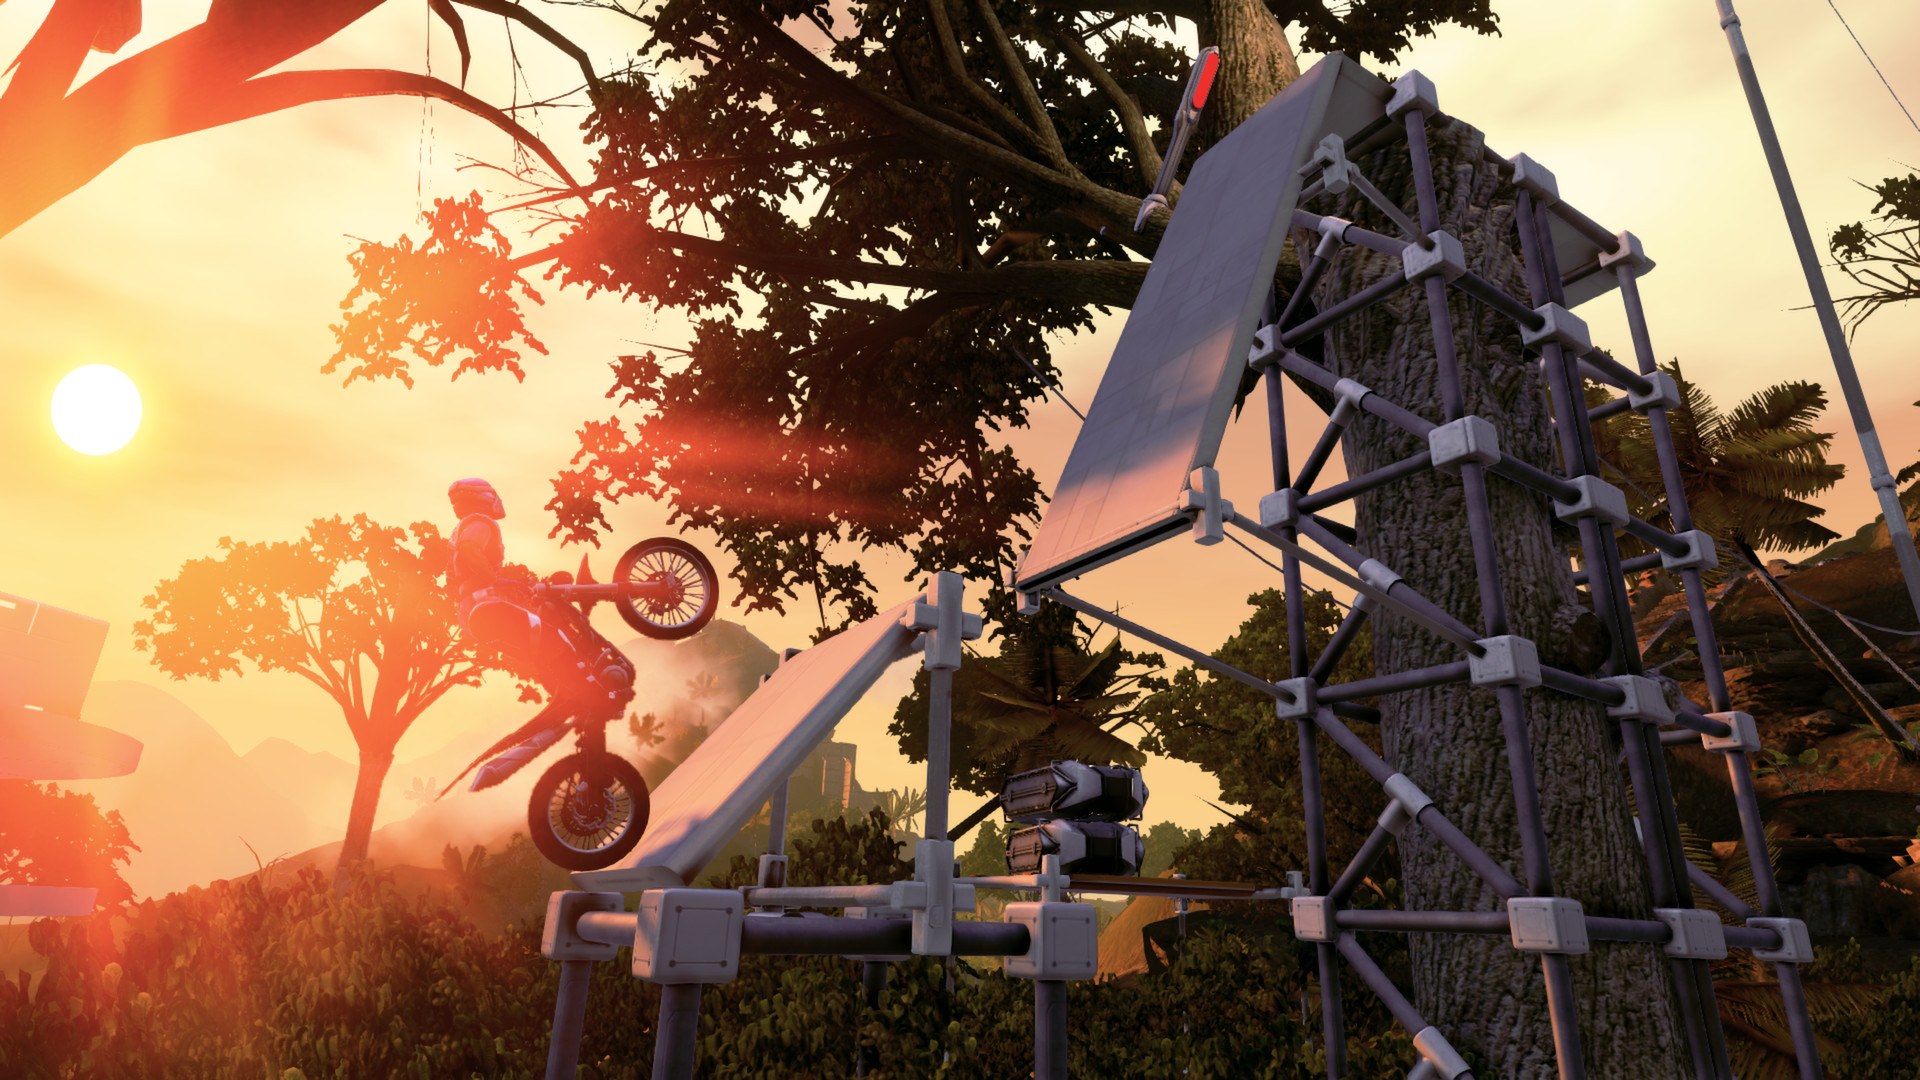 Download Trials Fusion Full PC Game